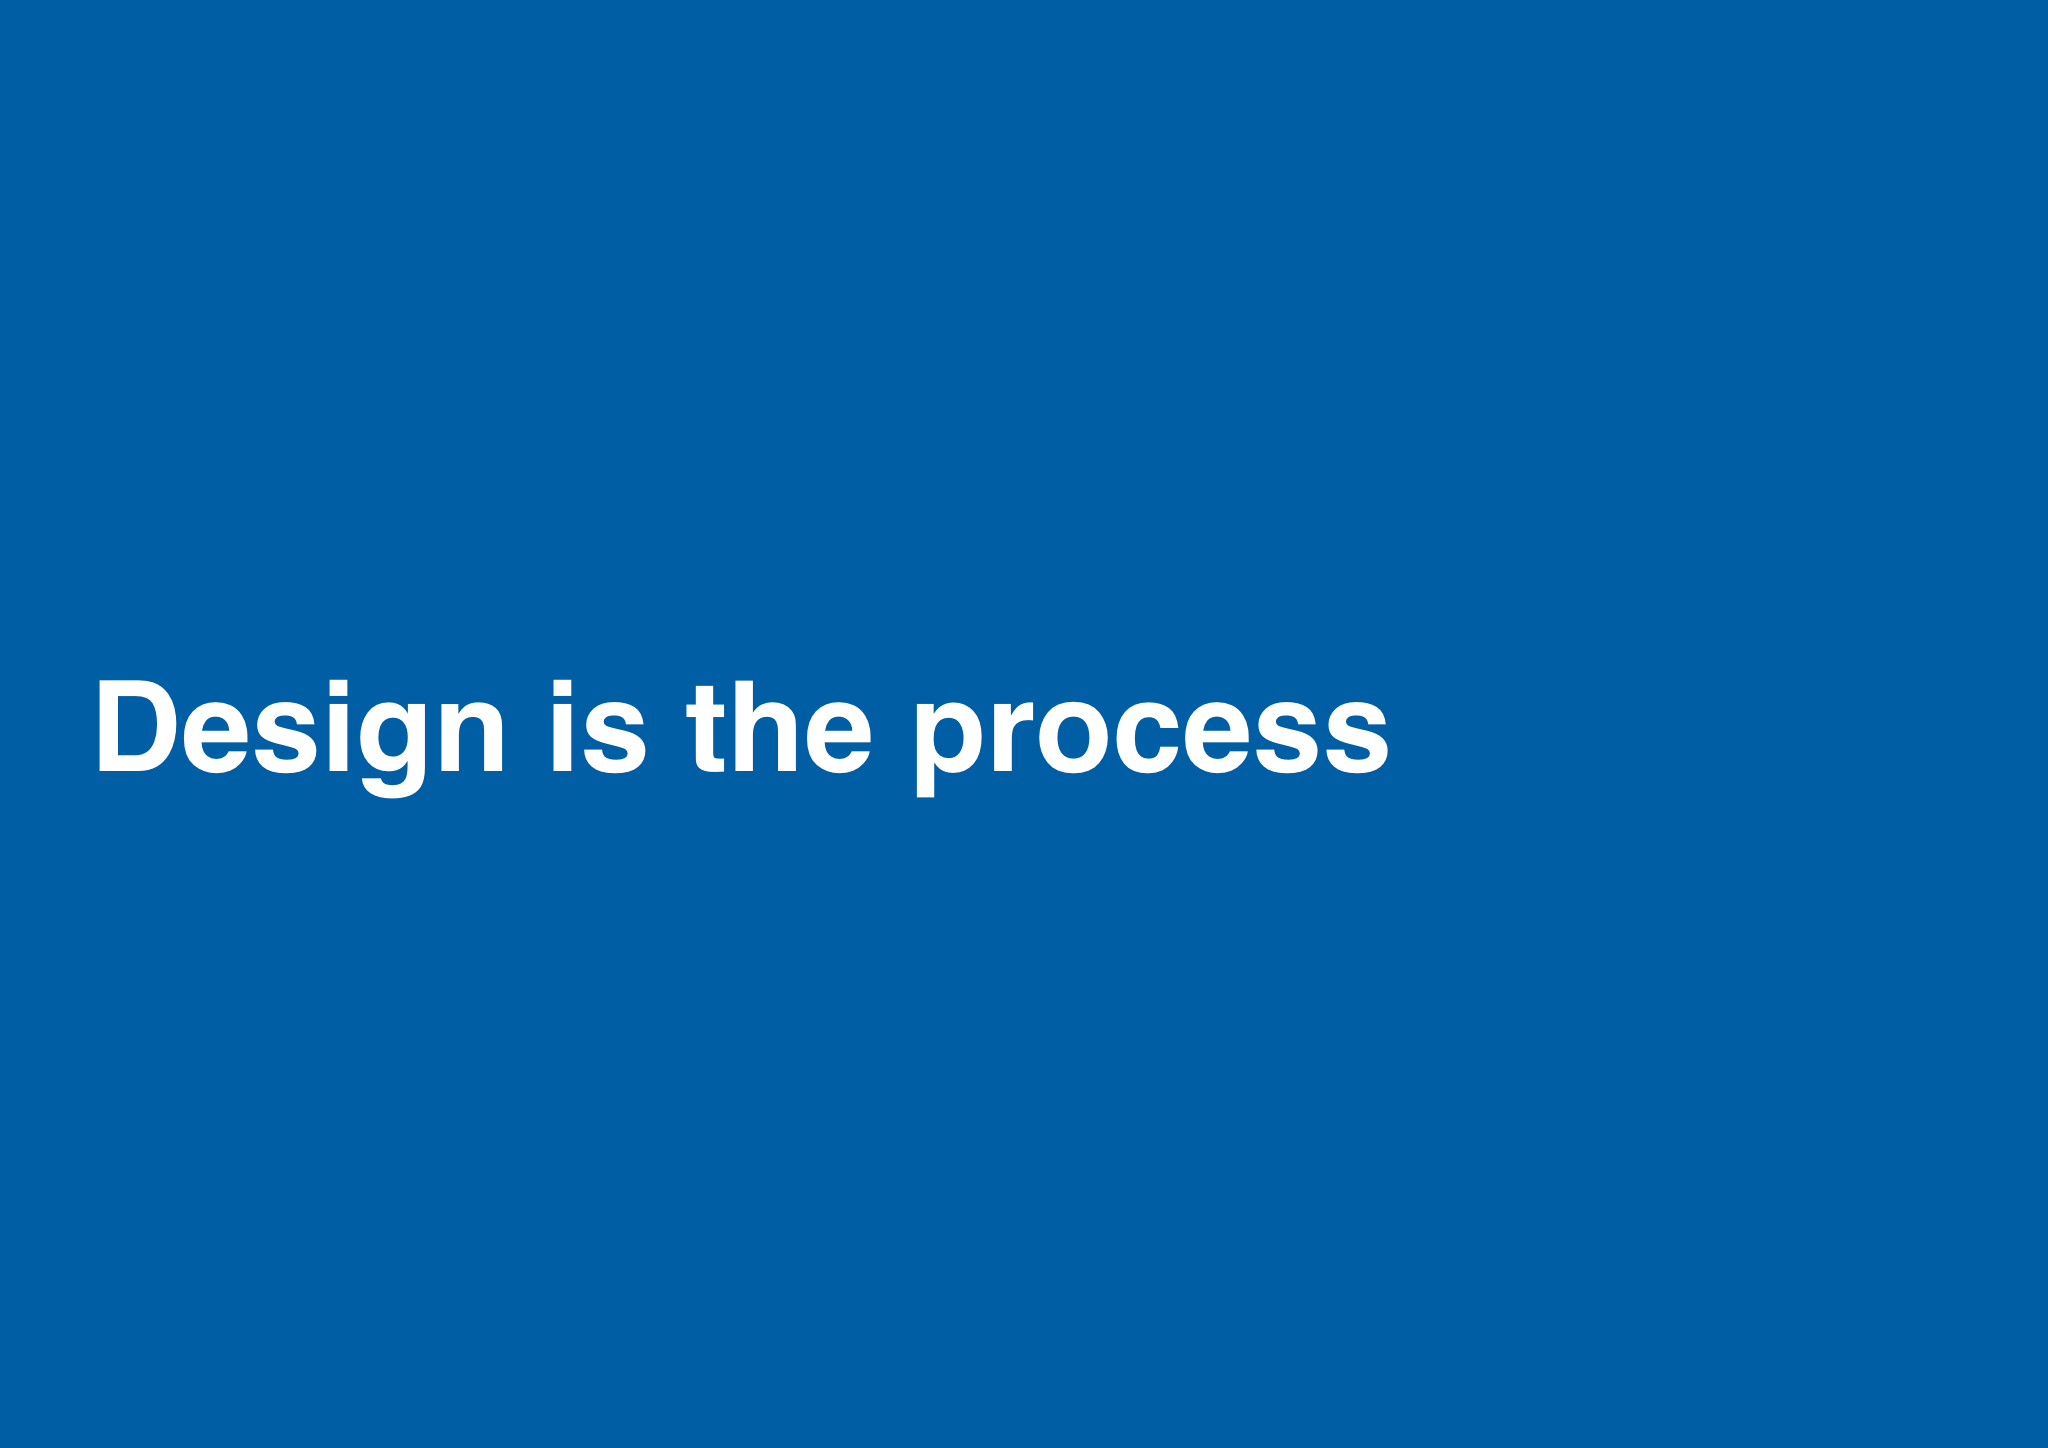 Design is the process